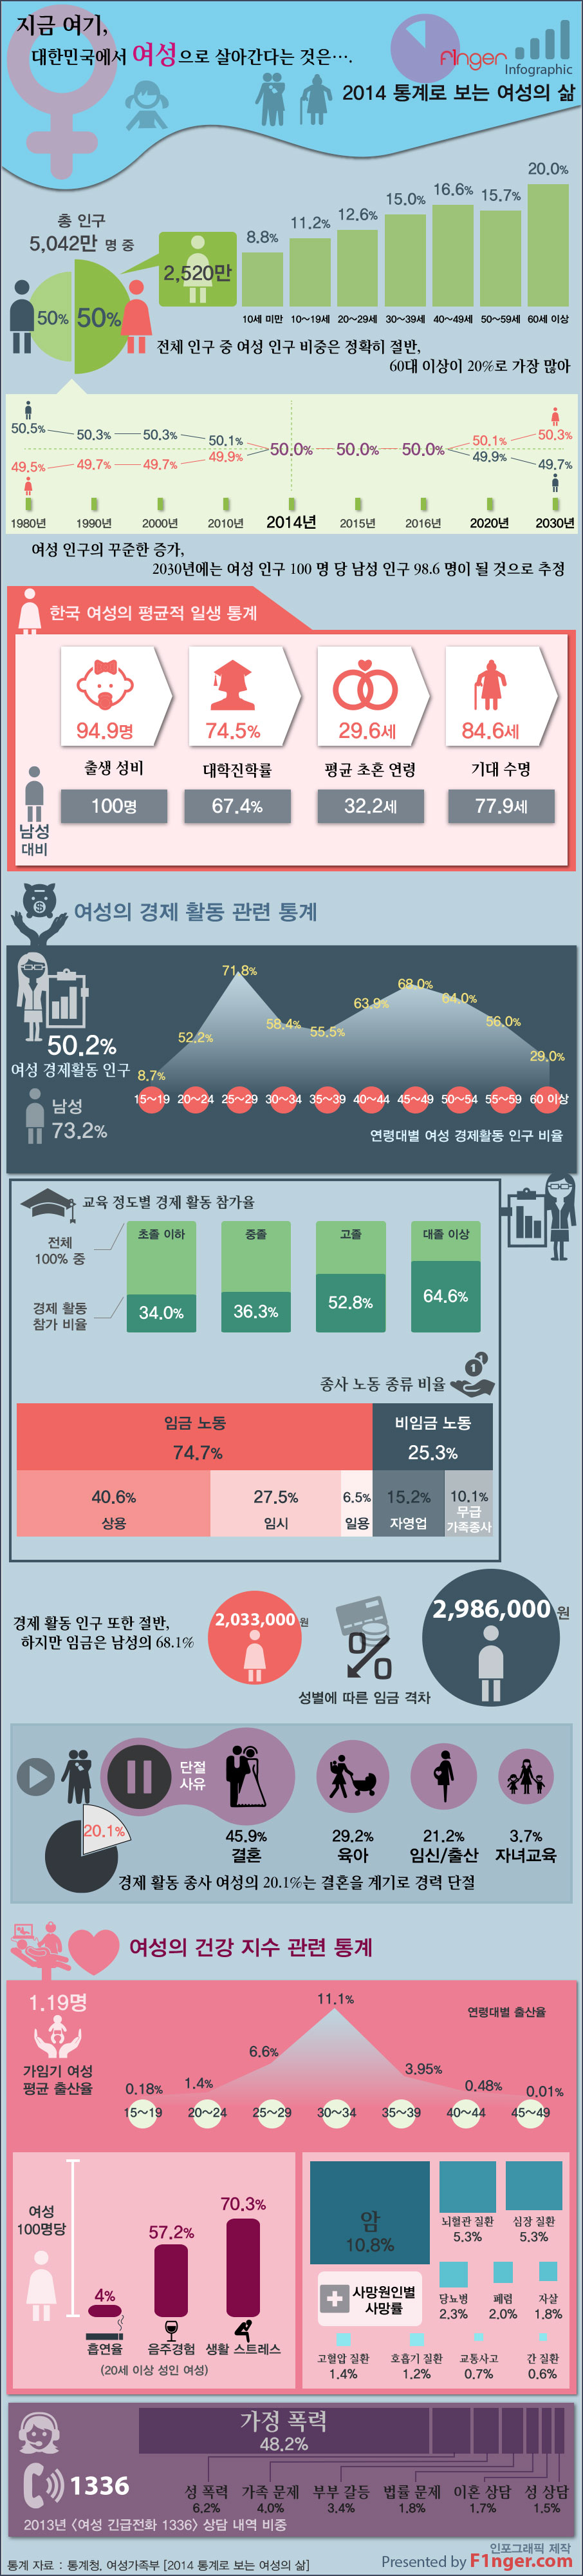 Woman-in-Korea-2014-infographic-by-F1nger